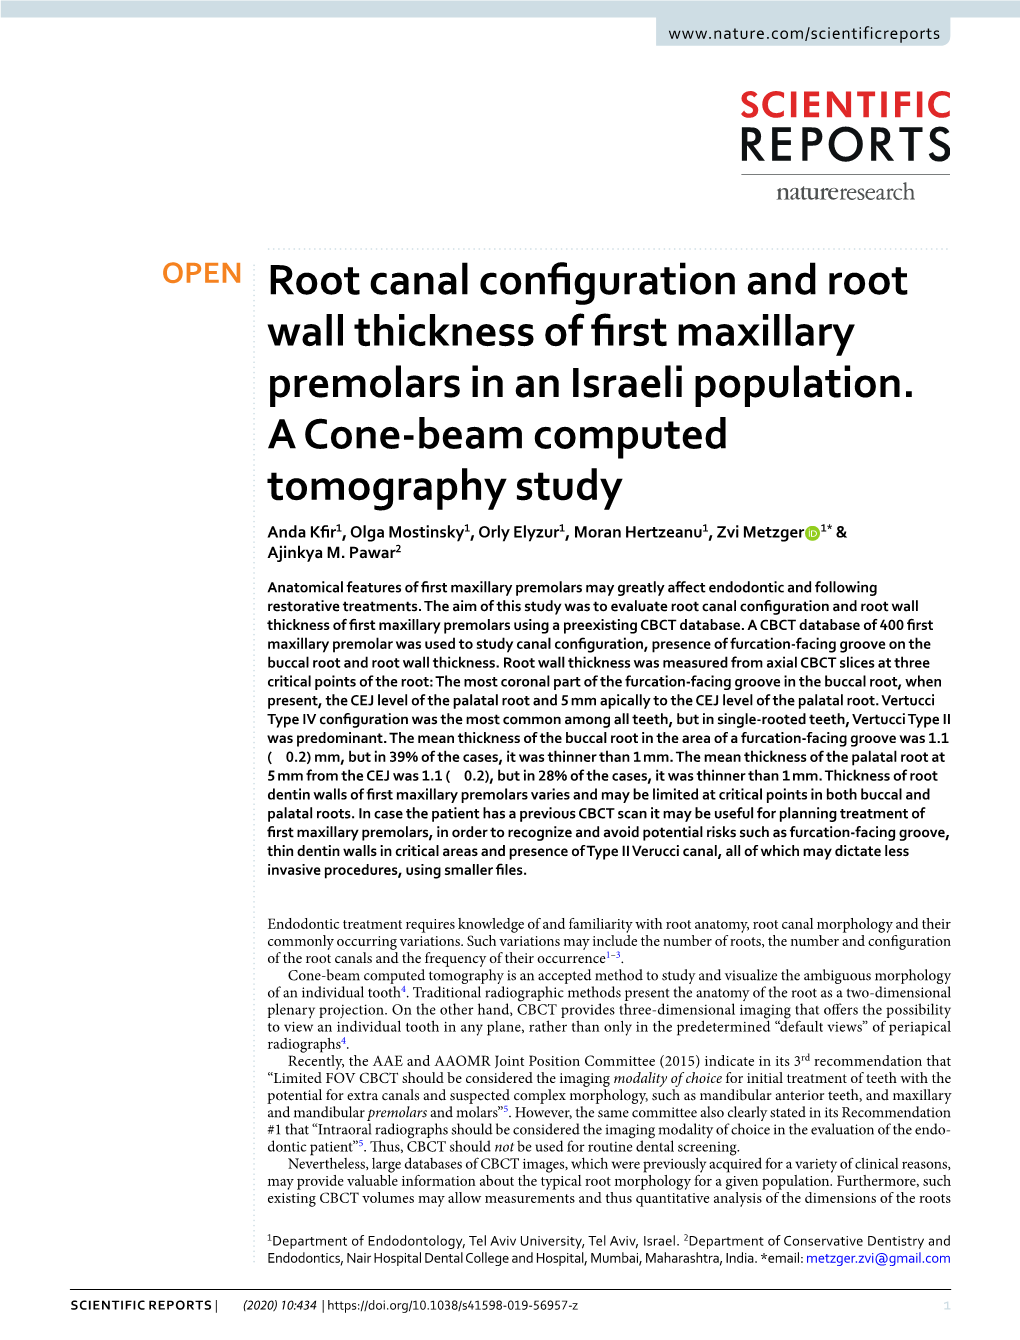 Root Canal Configuration and Root Wall Thickness of First Maxillary